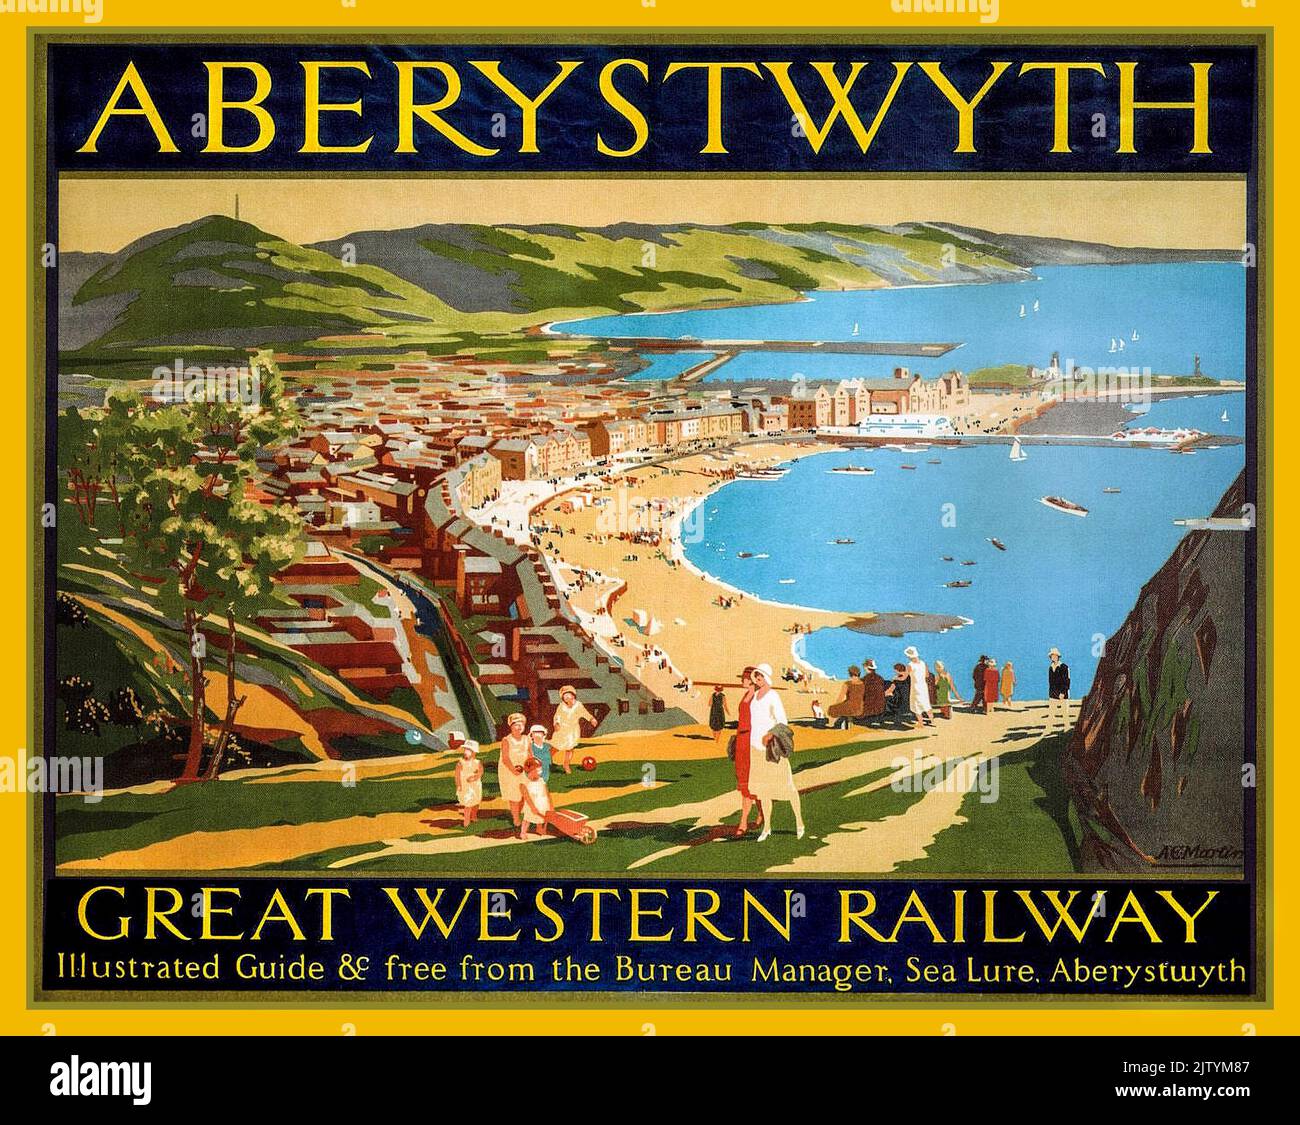 ABERYSTWYTH Vintage Great Western Railway Travel Poster 1930s for Aberystwyth Wales Great Britain UK Stock Photo